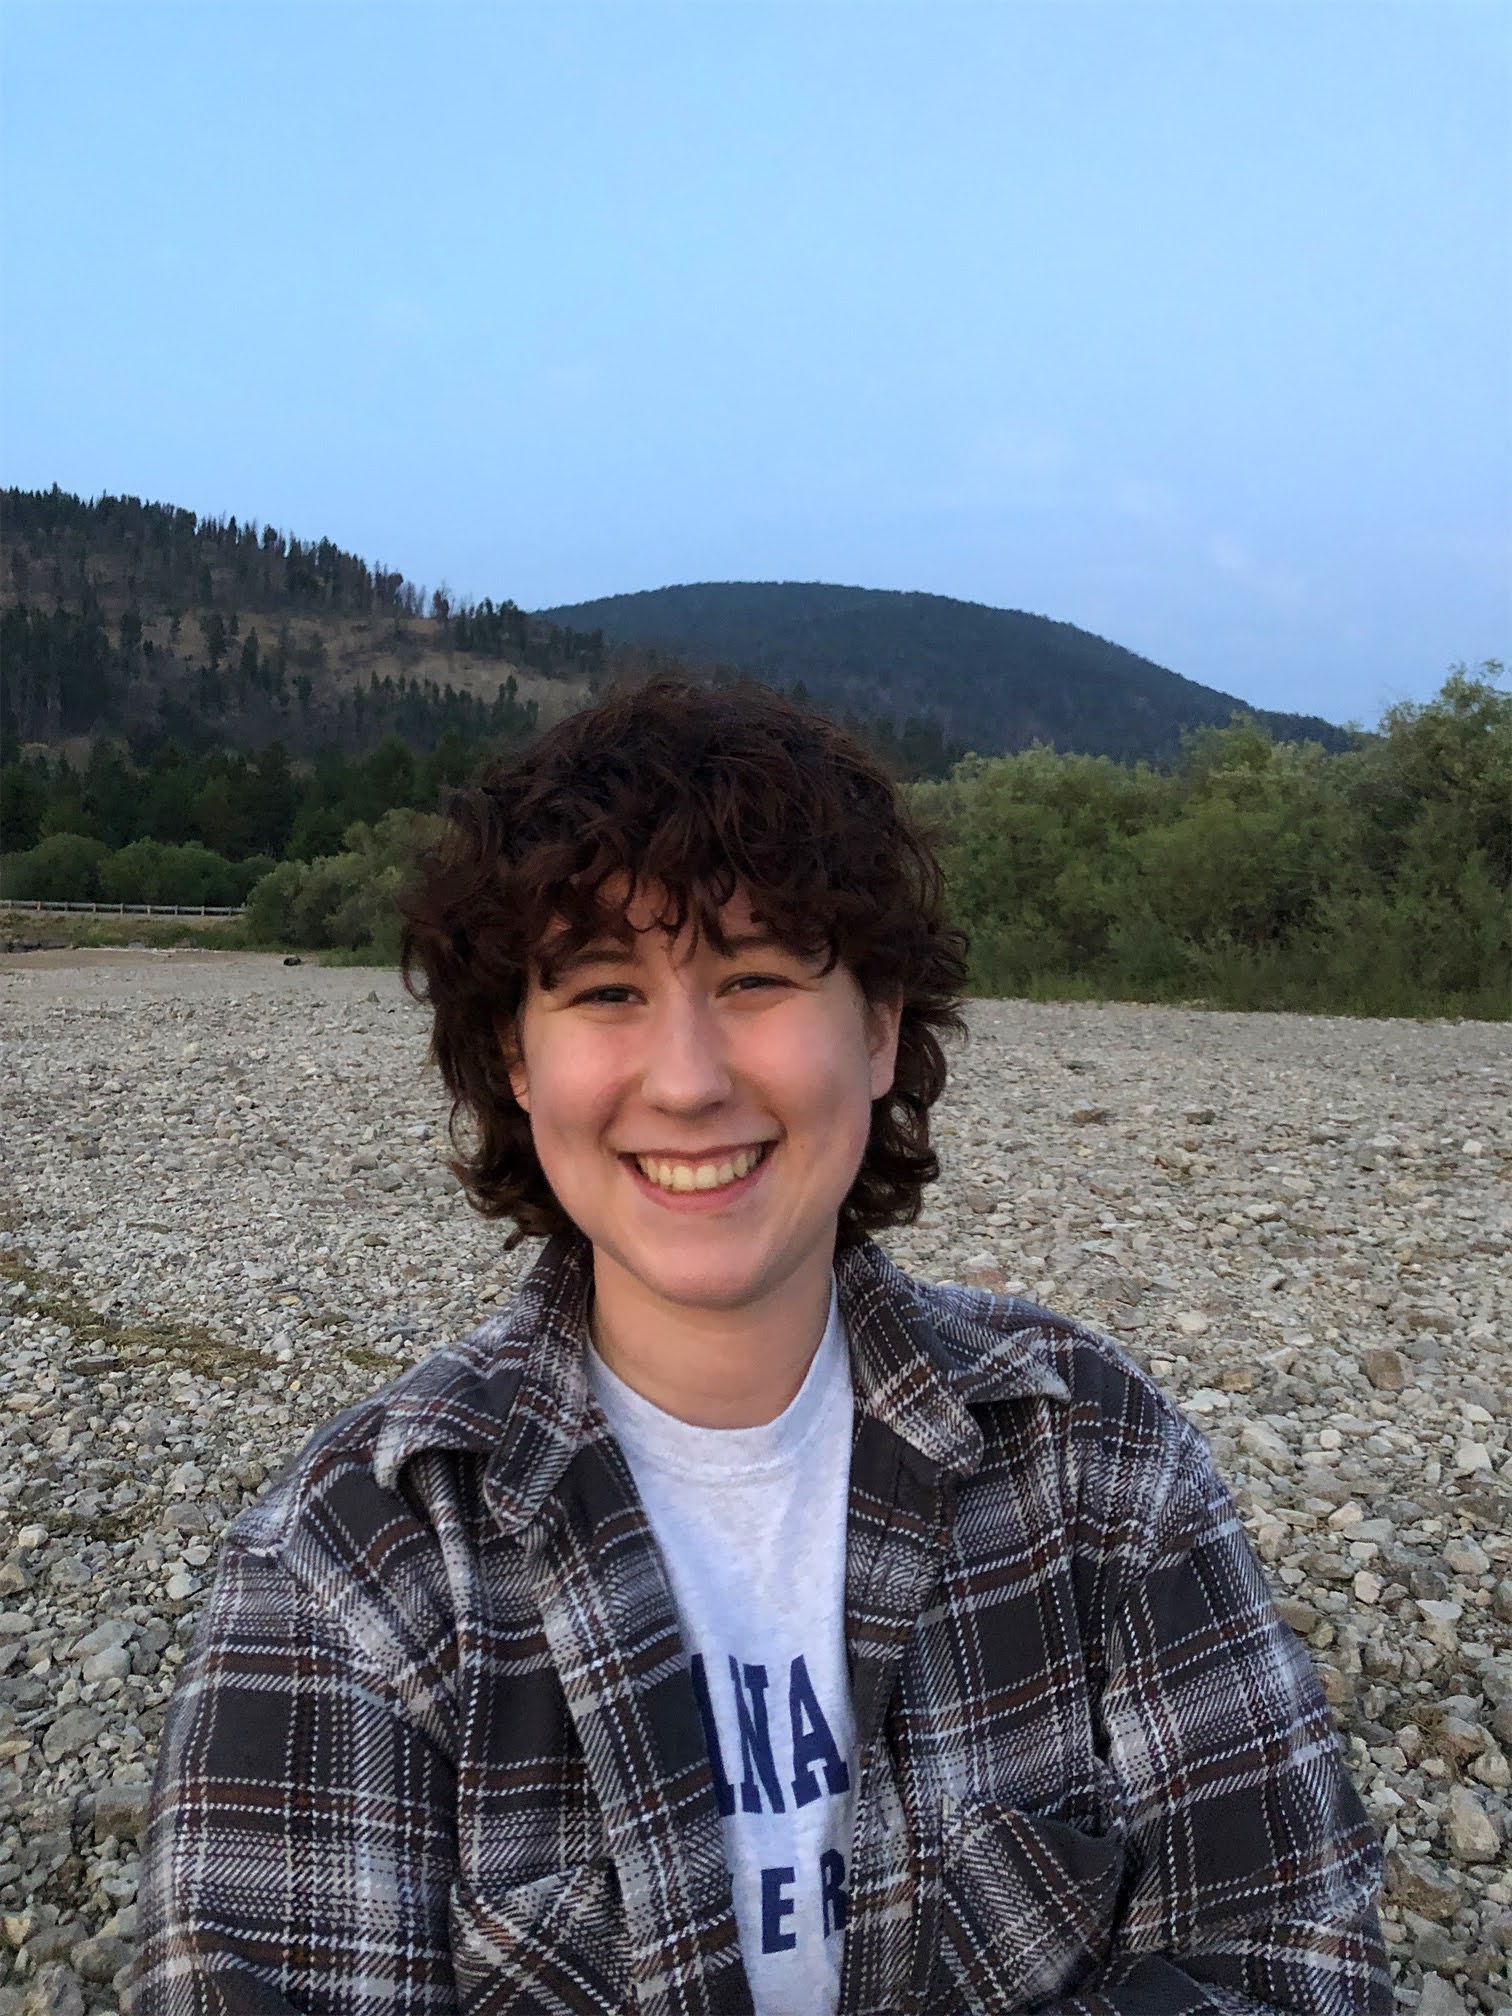 Dark haired woman smiling with a wilderness background